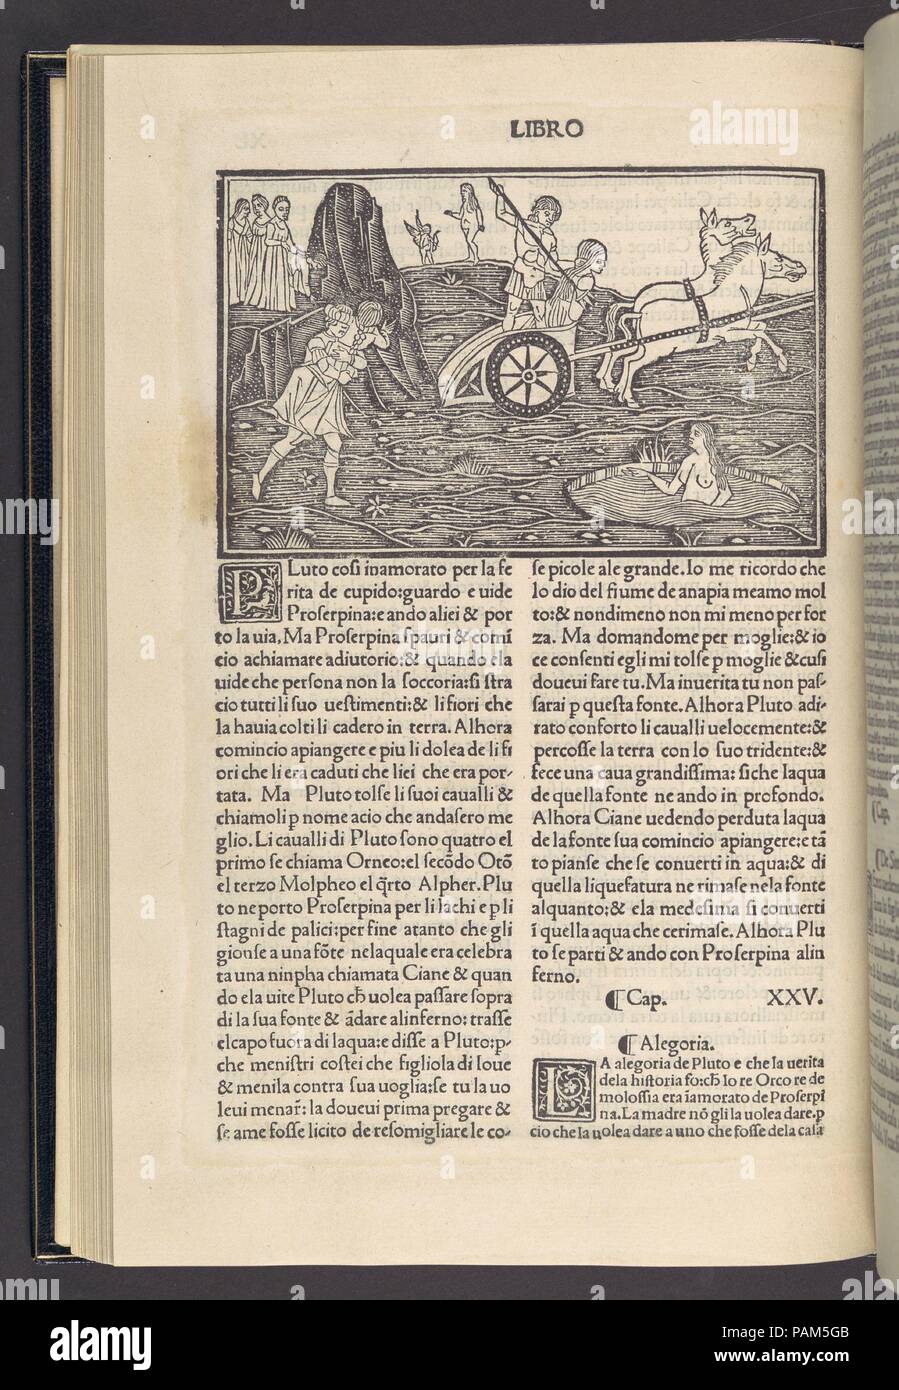 Methamorphoseos vulgare. Author: Written by Ovid (Roman, Sulmo 43 B.C.-A.D. 17 Tomis, Moesia). Designer: Design of some woodcuts attributed to Benedetto Bordone (Italian, Padua ca. 1455/60-1530 Padua, active mainly Venice from 1488). Dimensions: 11 3/4 × 8 1/8 × 7/8 in. (29.8 × 20.6 × 2.3 cm). Printer: Printed by Christoforo de Pensa for Lucantonio Guinta. Printmaker: Cutting of blocks signed 'ia' attributed to Jacob of Strasbourg (Italian School, born Alsace, active Venice, 1494-1530). Publisher: Published by Lucantonio Giunta (Italian, Florence 1457-1538 Venice) (Venice). Translator: Transla Stock Photo